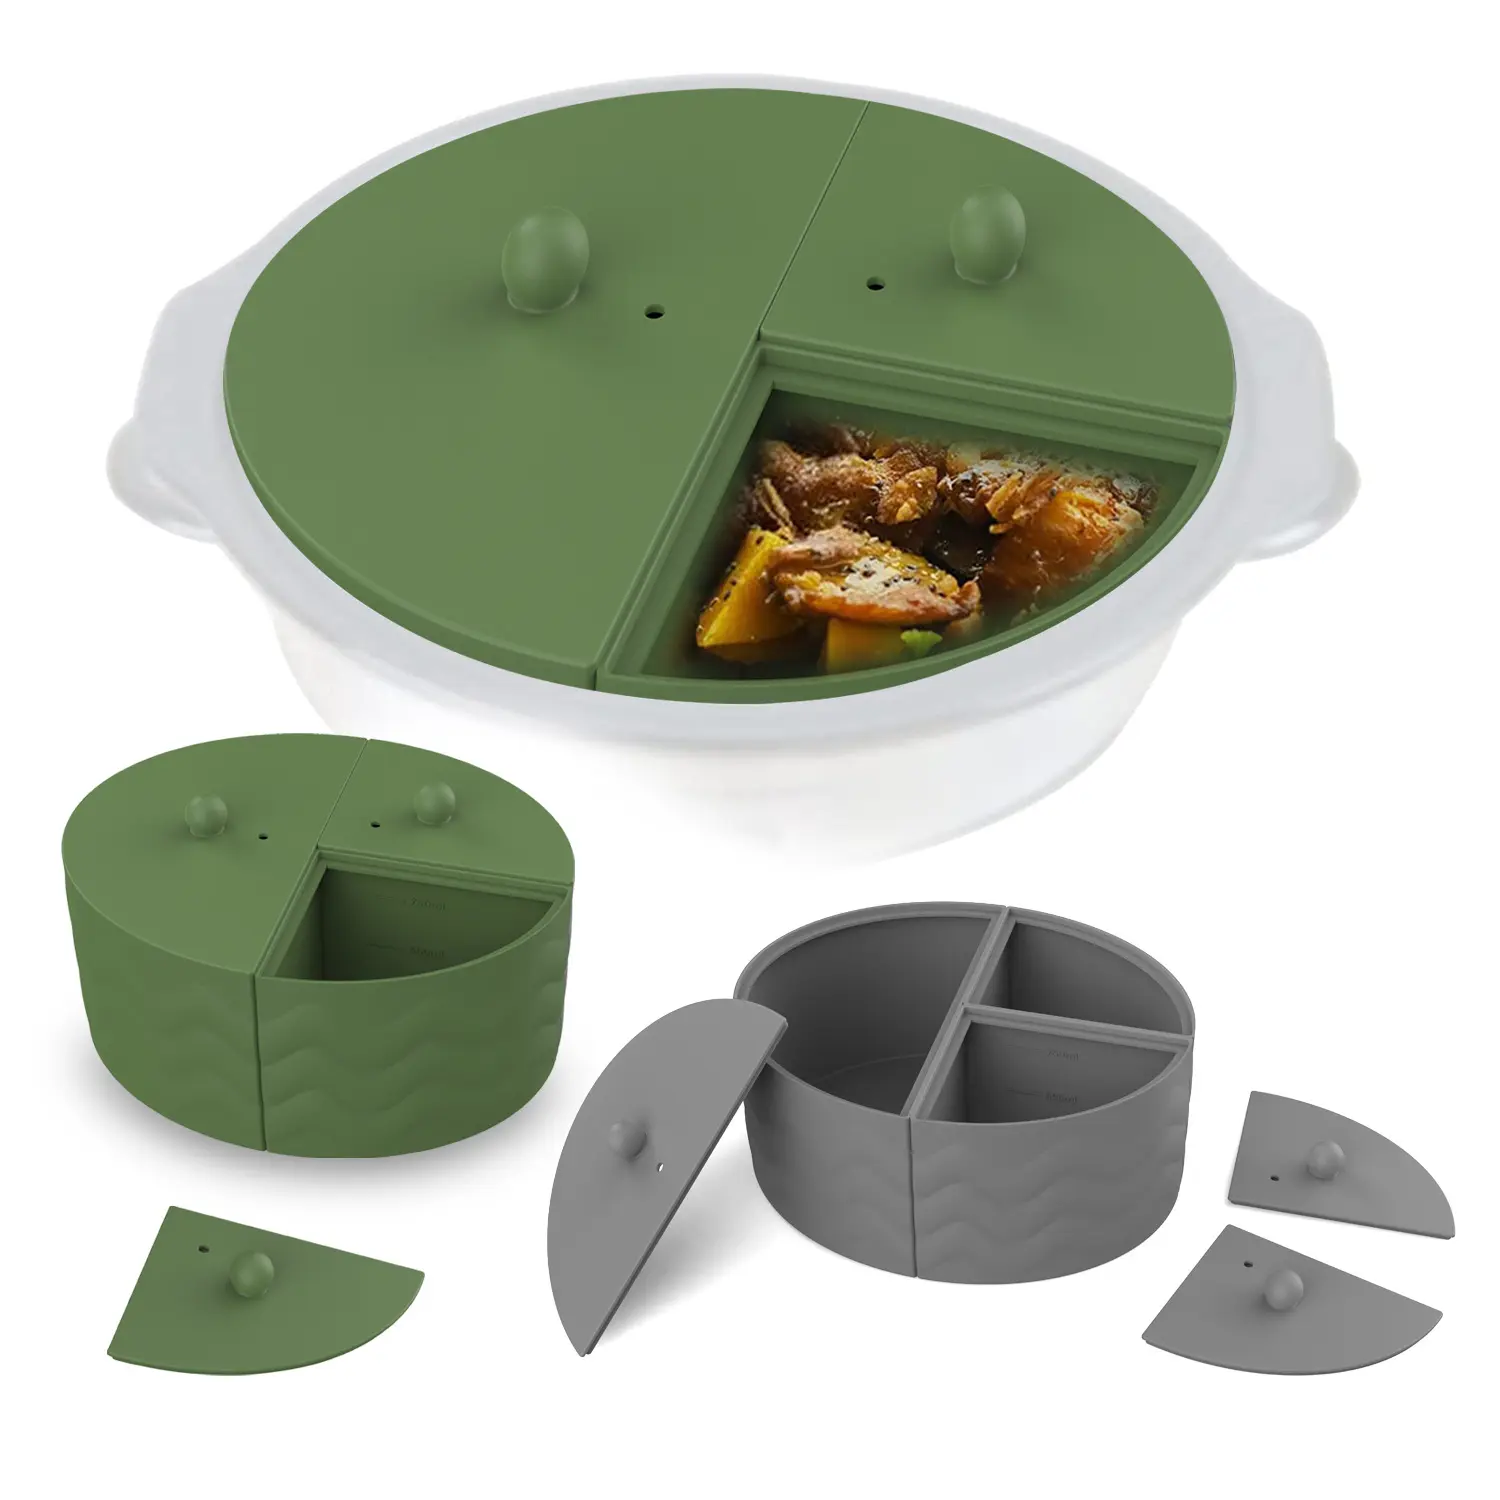 S262 High-temperature Bpa Free Resistant Reusable 6-8 QT Slow Cooker Divider Liner Silicone Slow Cooker Liner With Lids